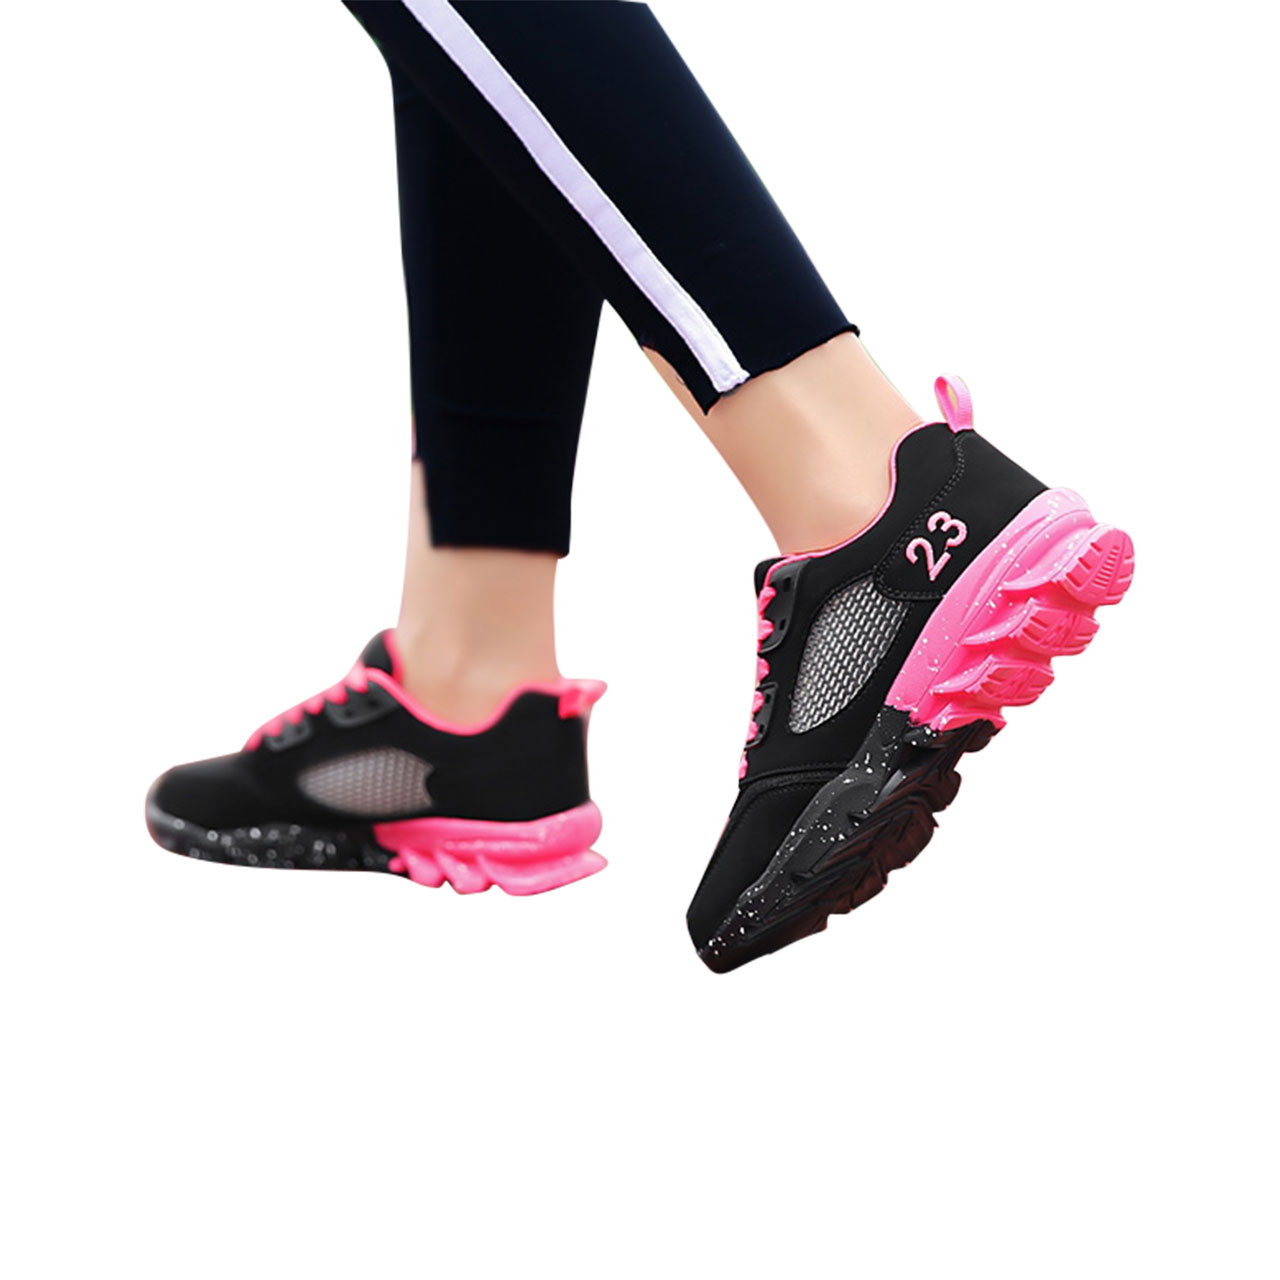 Women's Athletic Shoes Platform Lace-up Tulle Comfort Walking Shoes Pink